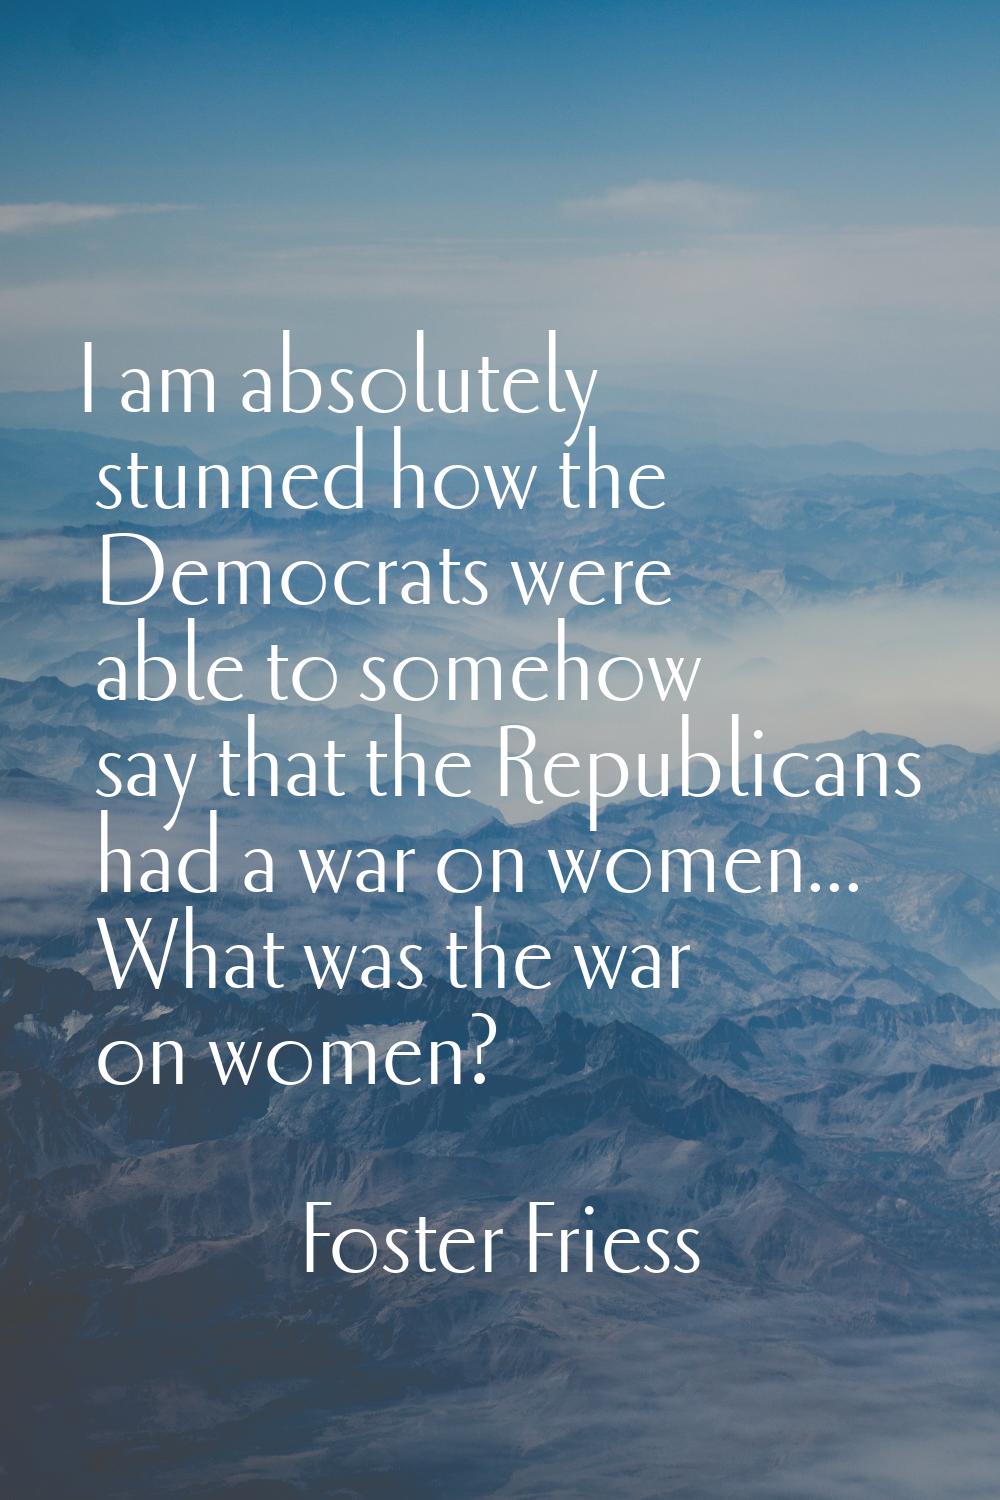 I am absolutely stunned how the Democrats were able to somehow say that the Republicans had a war o